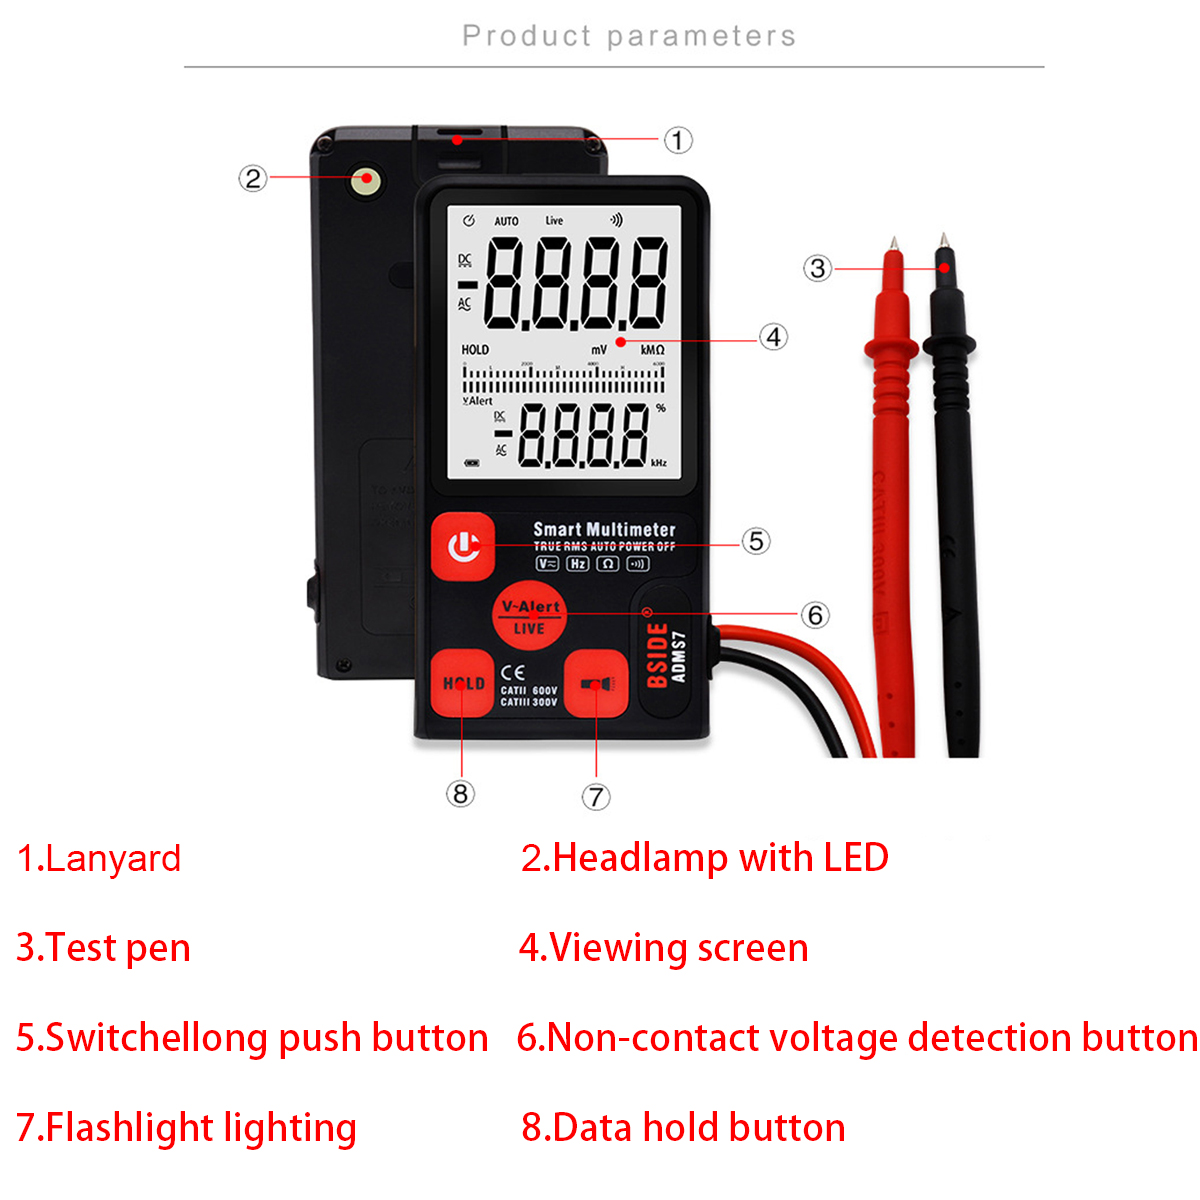 ADMS79-ADMS79-CL--Analog-Tester-Digital-Multimeter-Touch-DCAC-RMS-Multimeter-Transistor-Capacitor-1733095-6